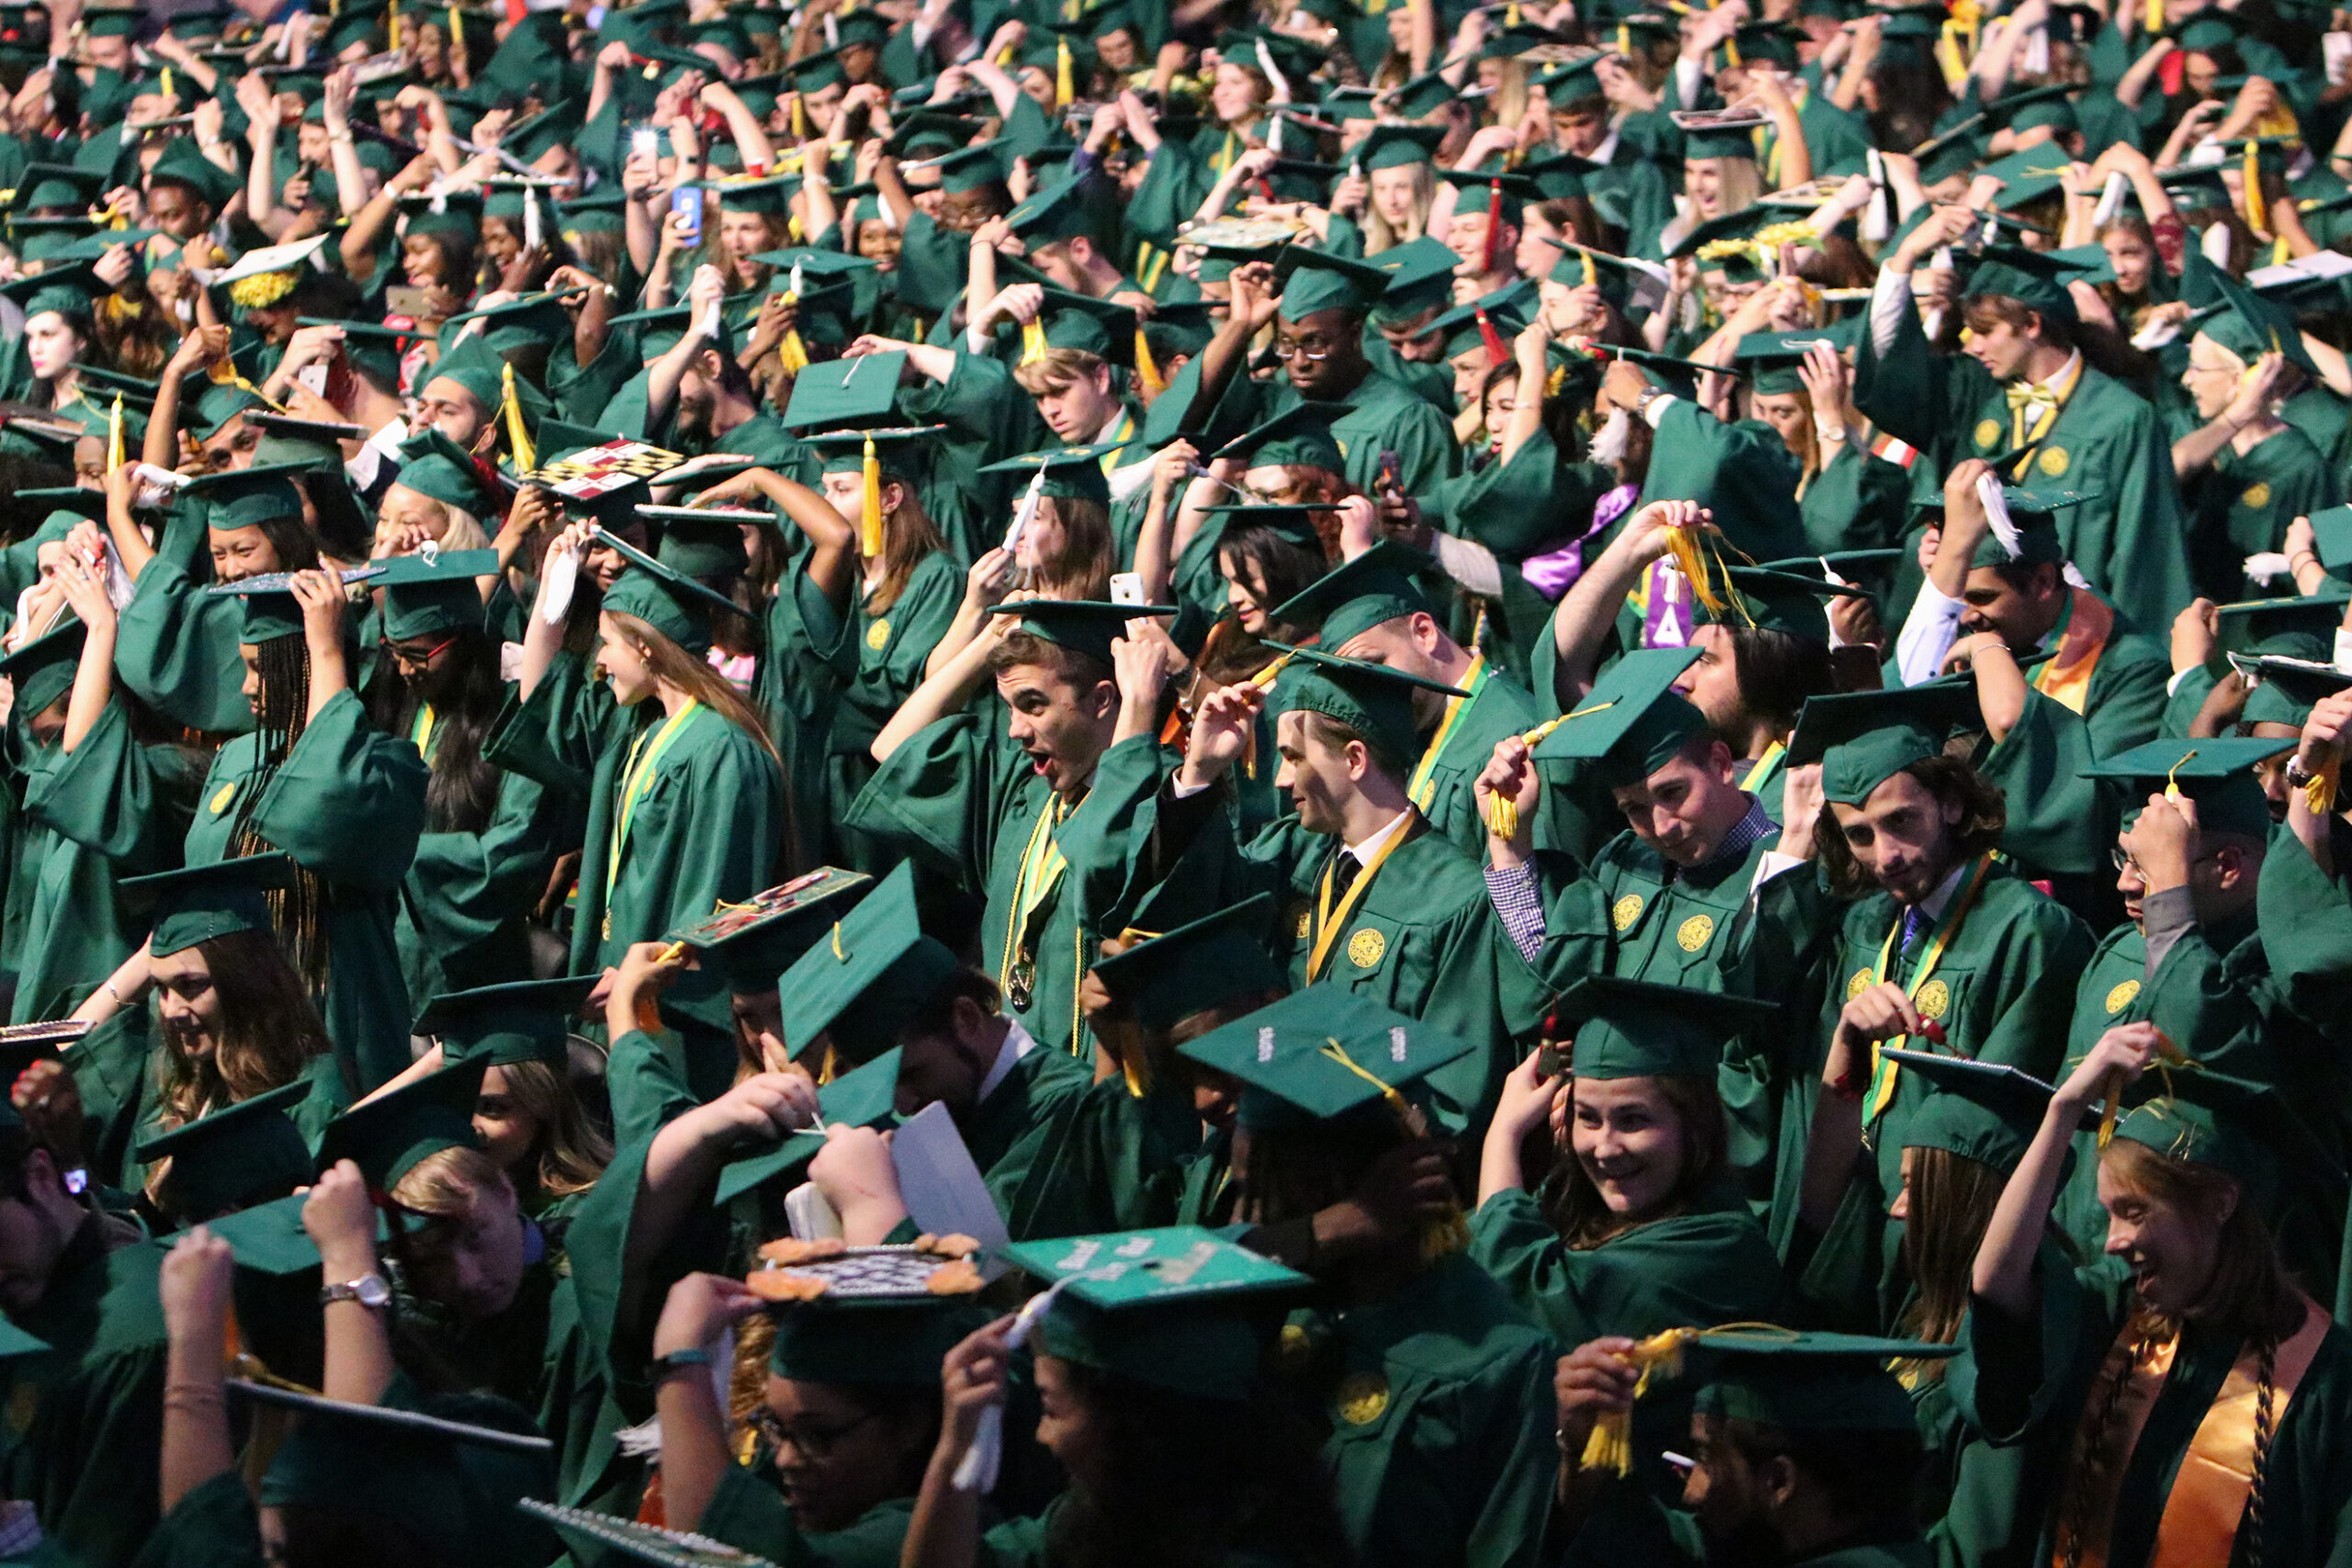 OPINION: College is not the only post-graduation path